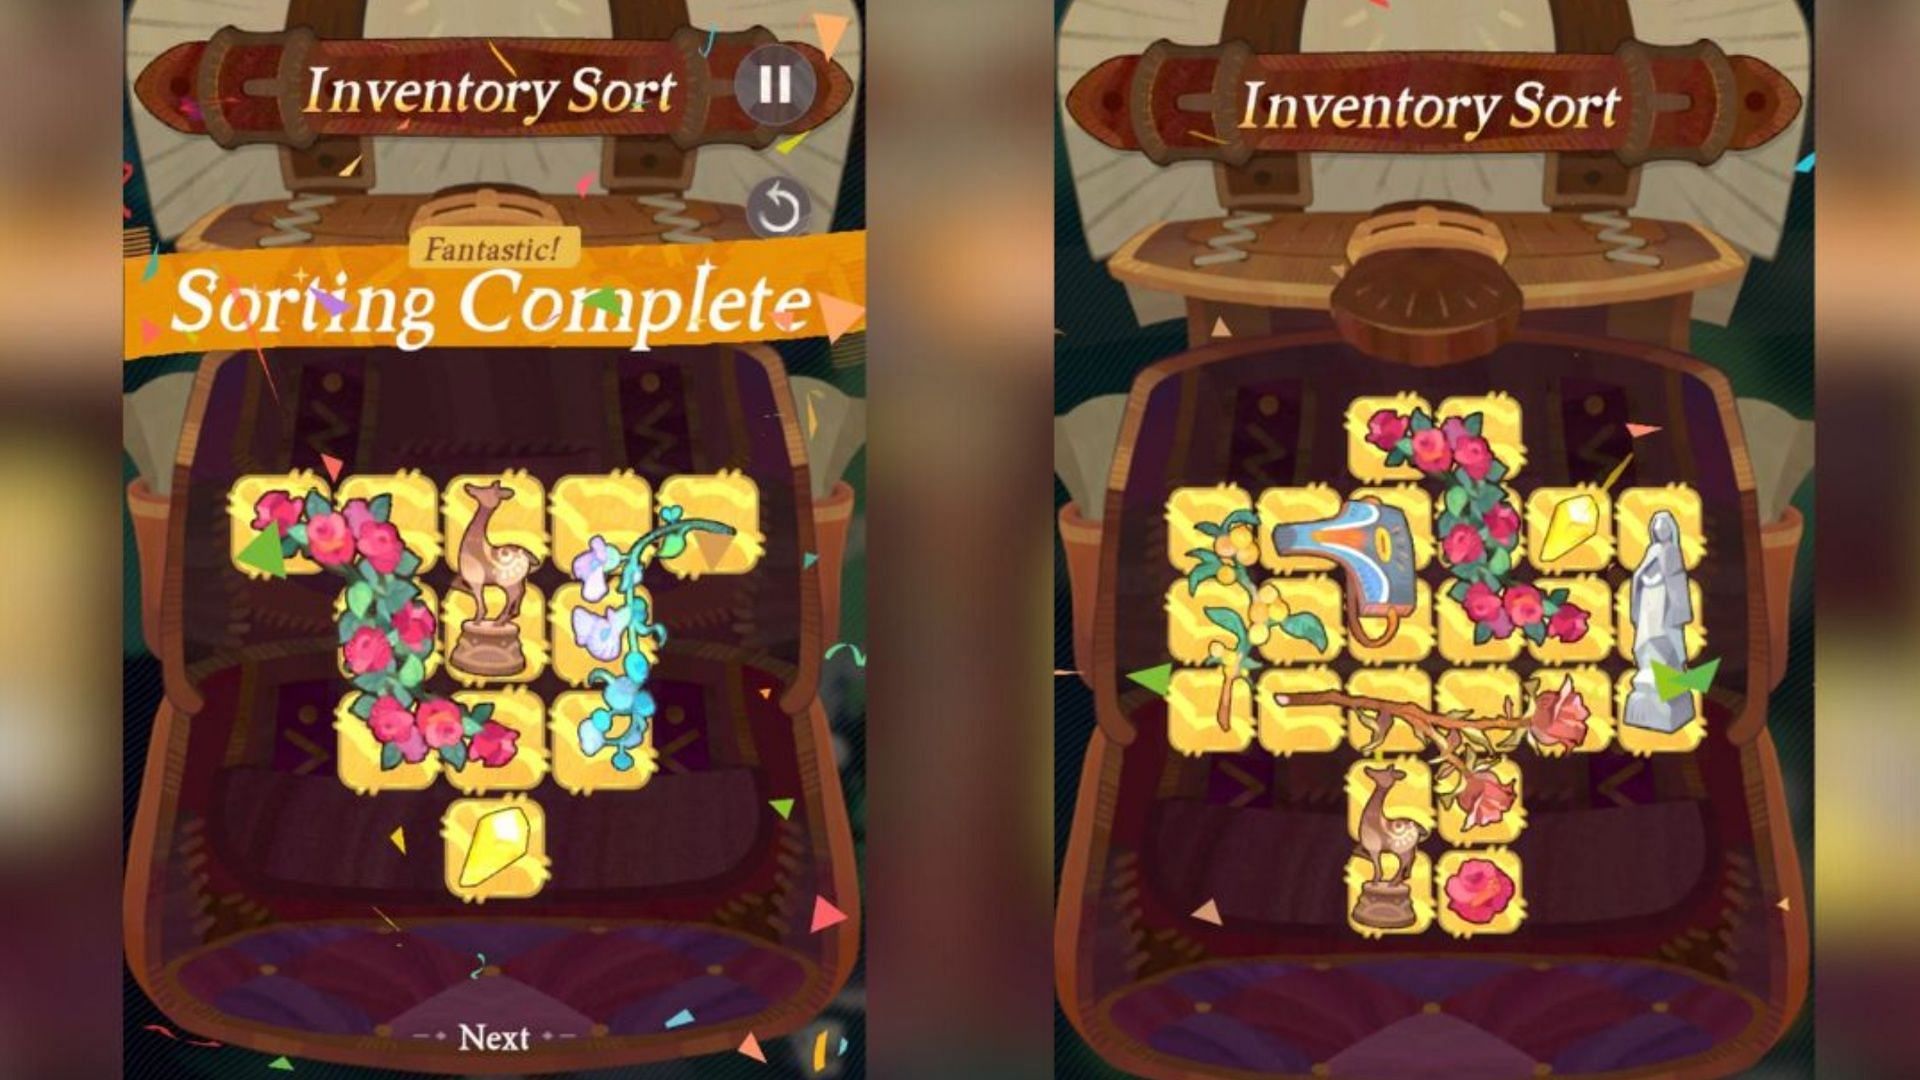 Inventory sort mini-game stages 5 and 6 (Lilith Games)